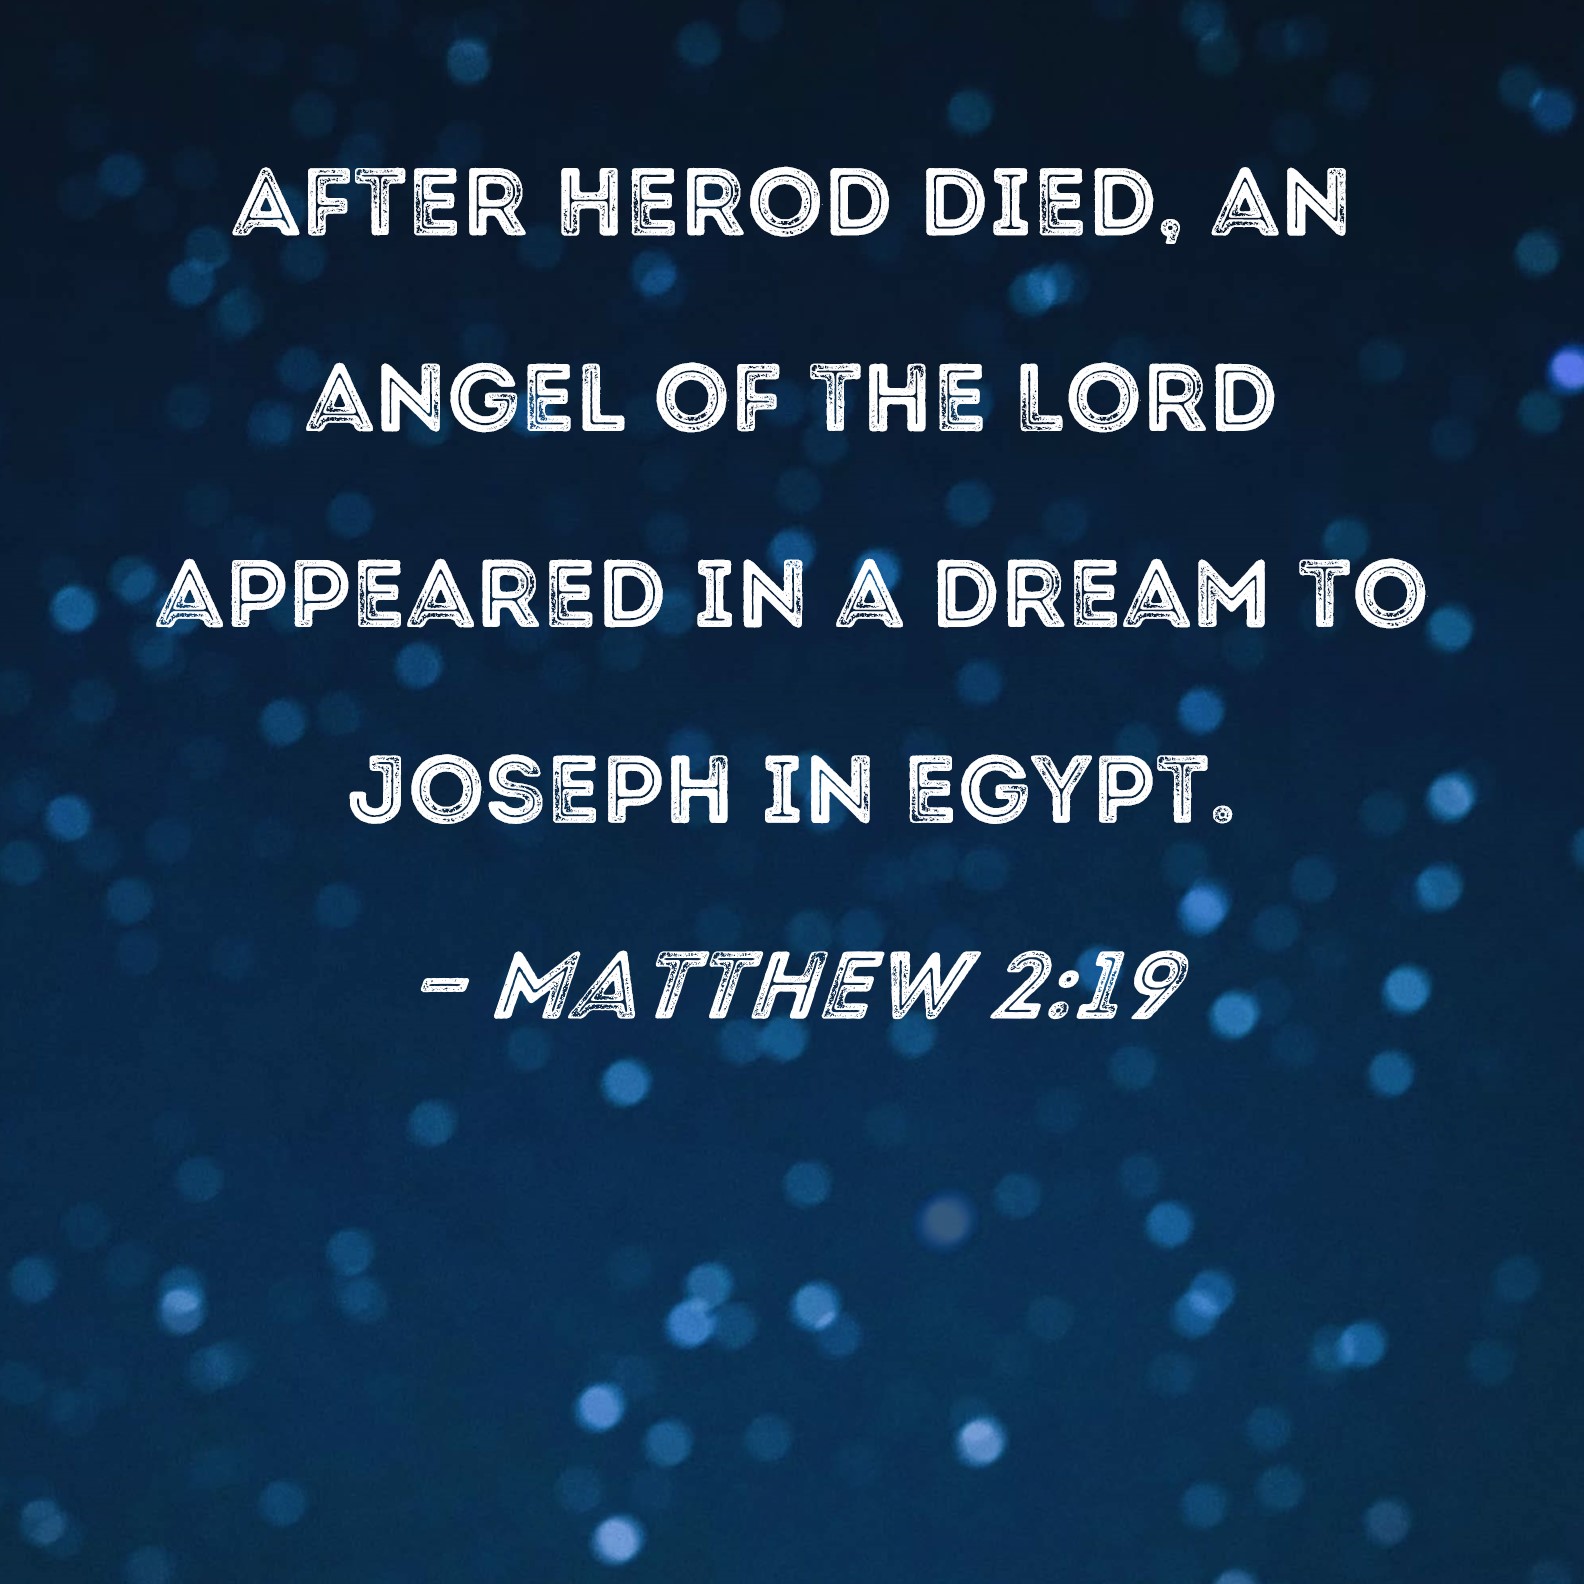 Matthew 2:19 After Herod died, an angel of the Lord appeared in a dream to Joseph in Egypt.